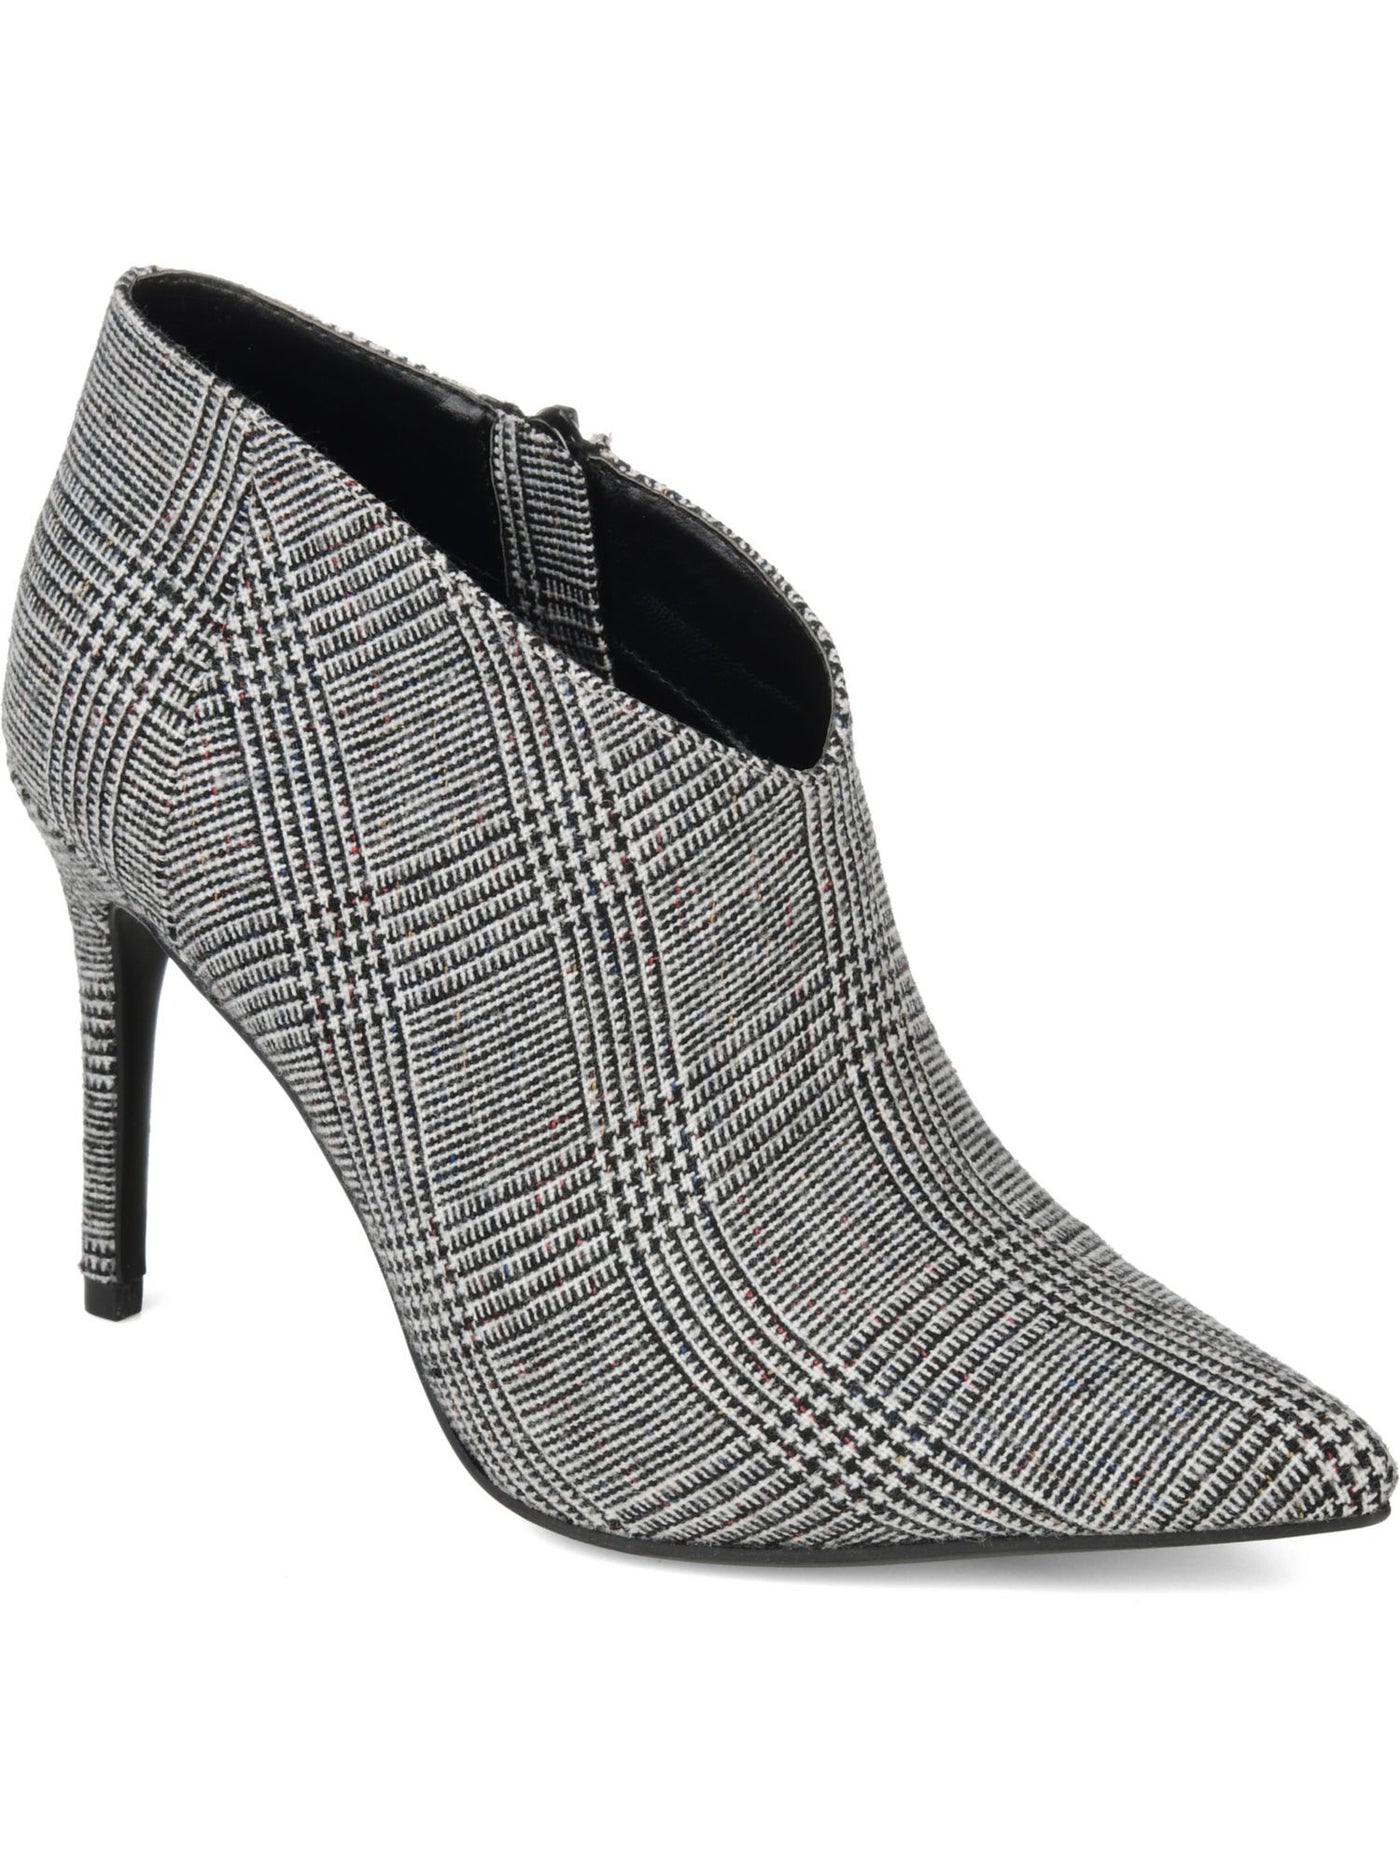 6 DEGREES Womens Gray Gingham Padded Demmi Pointed Toe Stiletto Zip-Up Booties 5.5 M